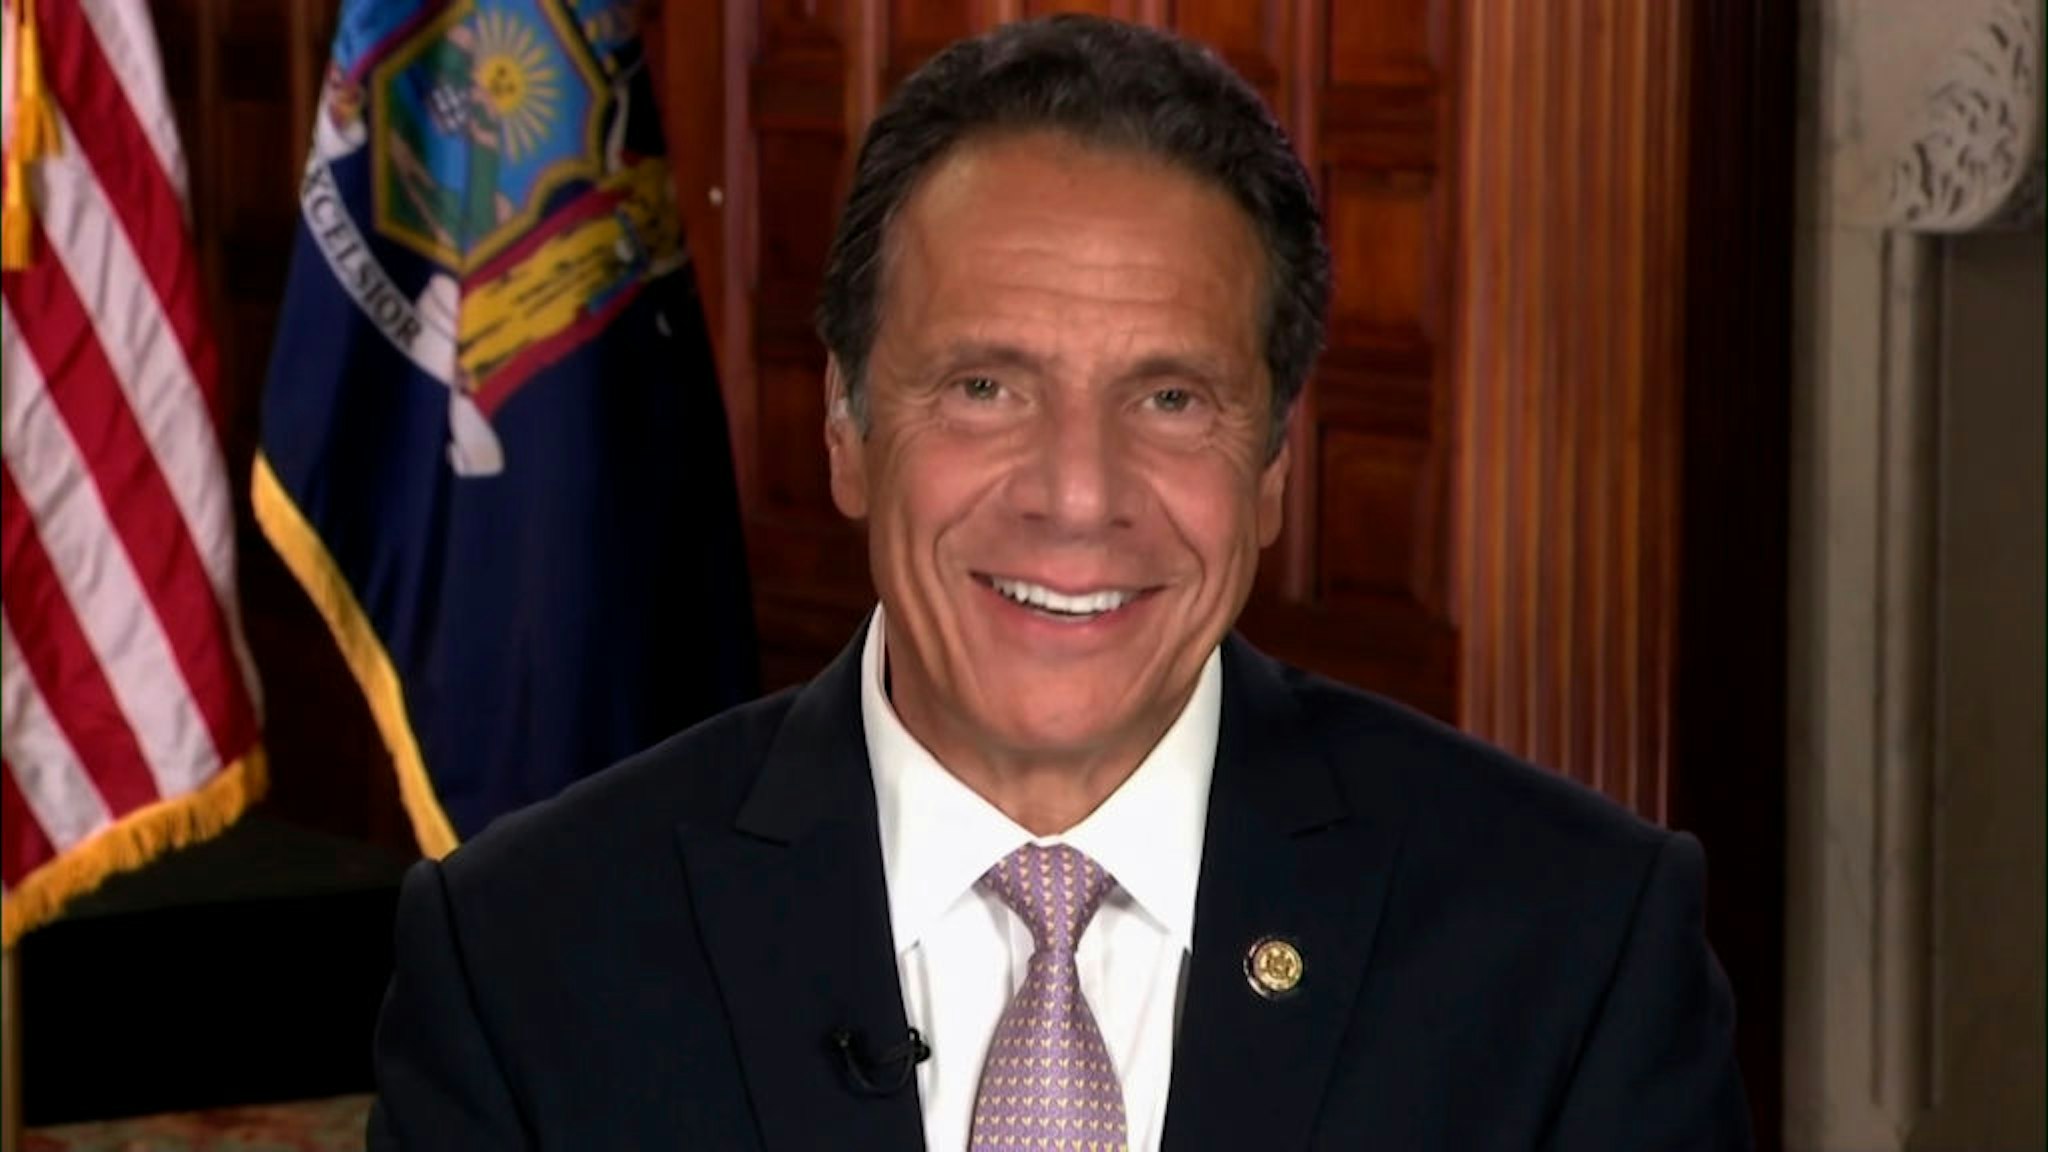 Pictured in this screengrab: New York Governor Andrew Cuomo during an interview on July 13, 2020